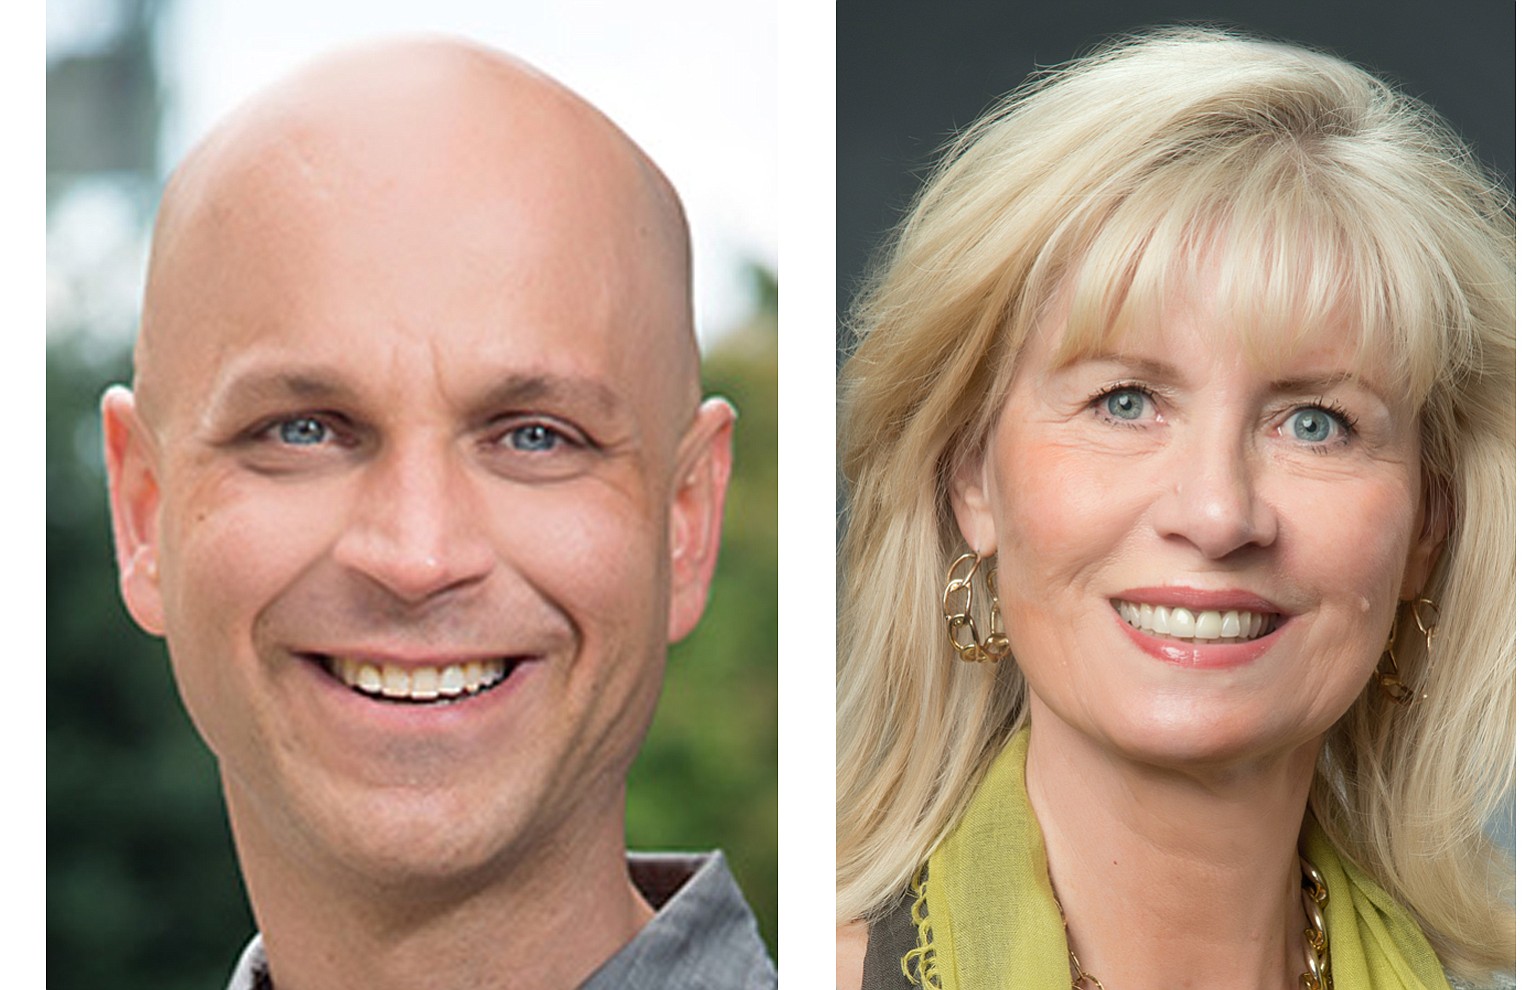 Ty Stober, left, and Linda Glover are leading the race for the Vancouver City Council position 5 seat.